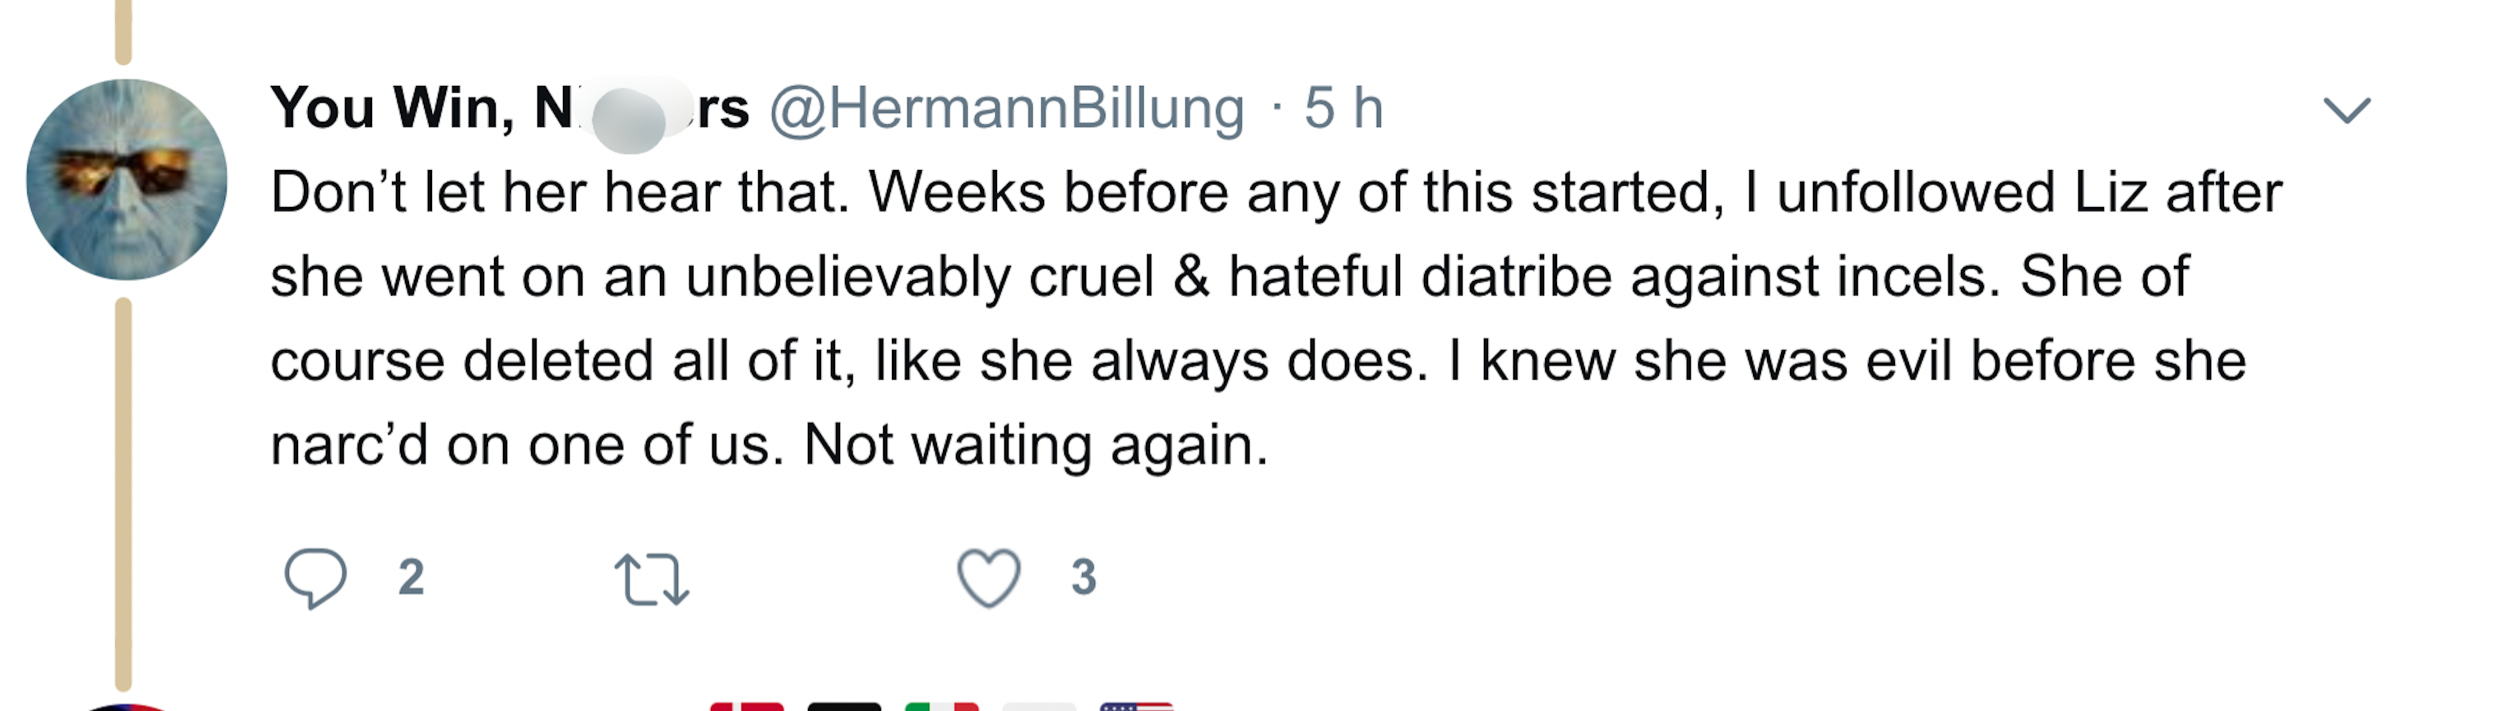 TW anti Black racism. Woe as @HermannBillung uses N-word in his name while saying that he "unfollowed Liz after she went on an unbelievably cruel and hateful diatribe against incels."